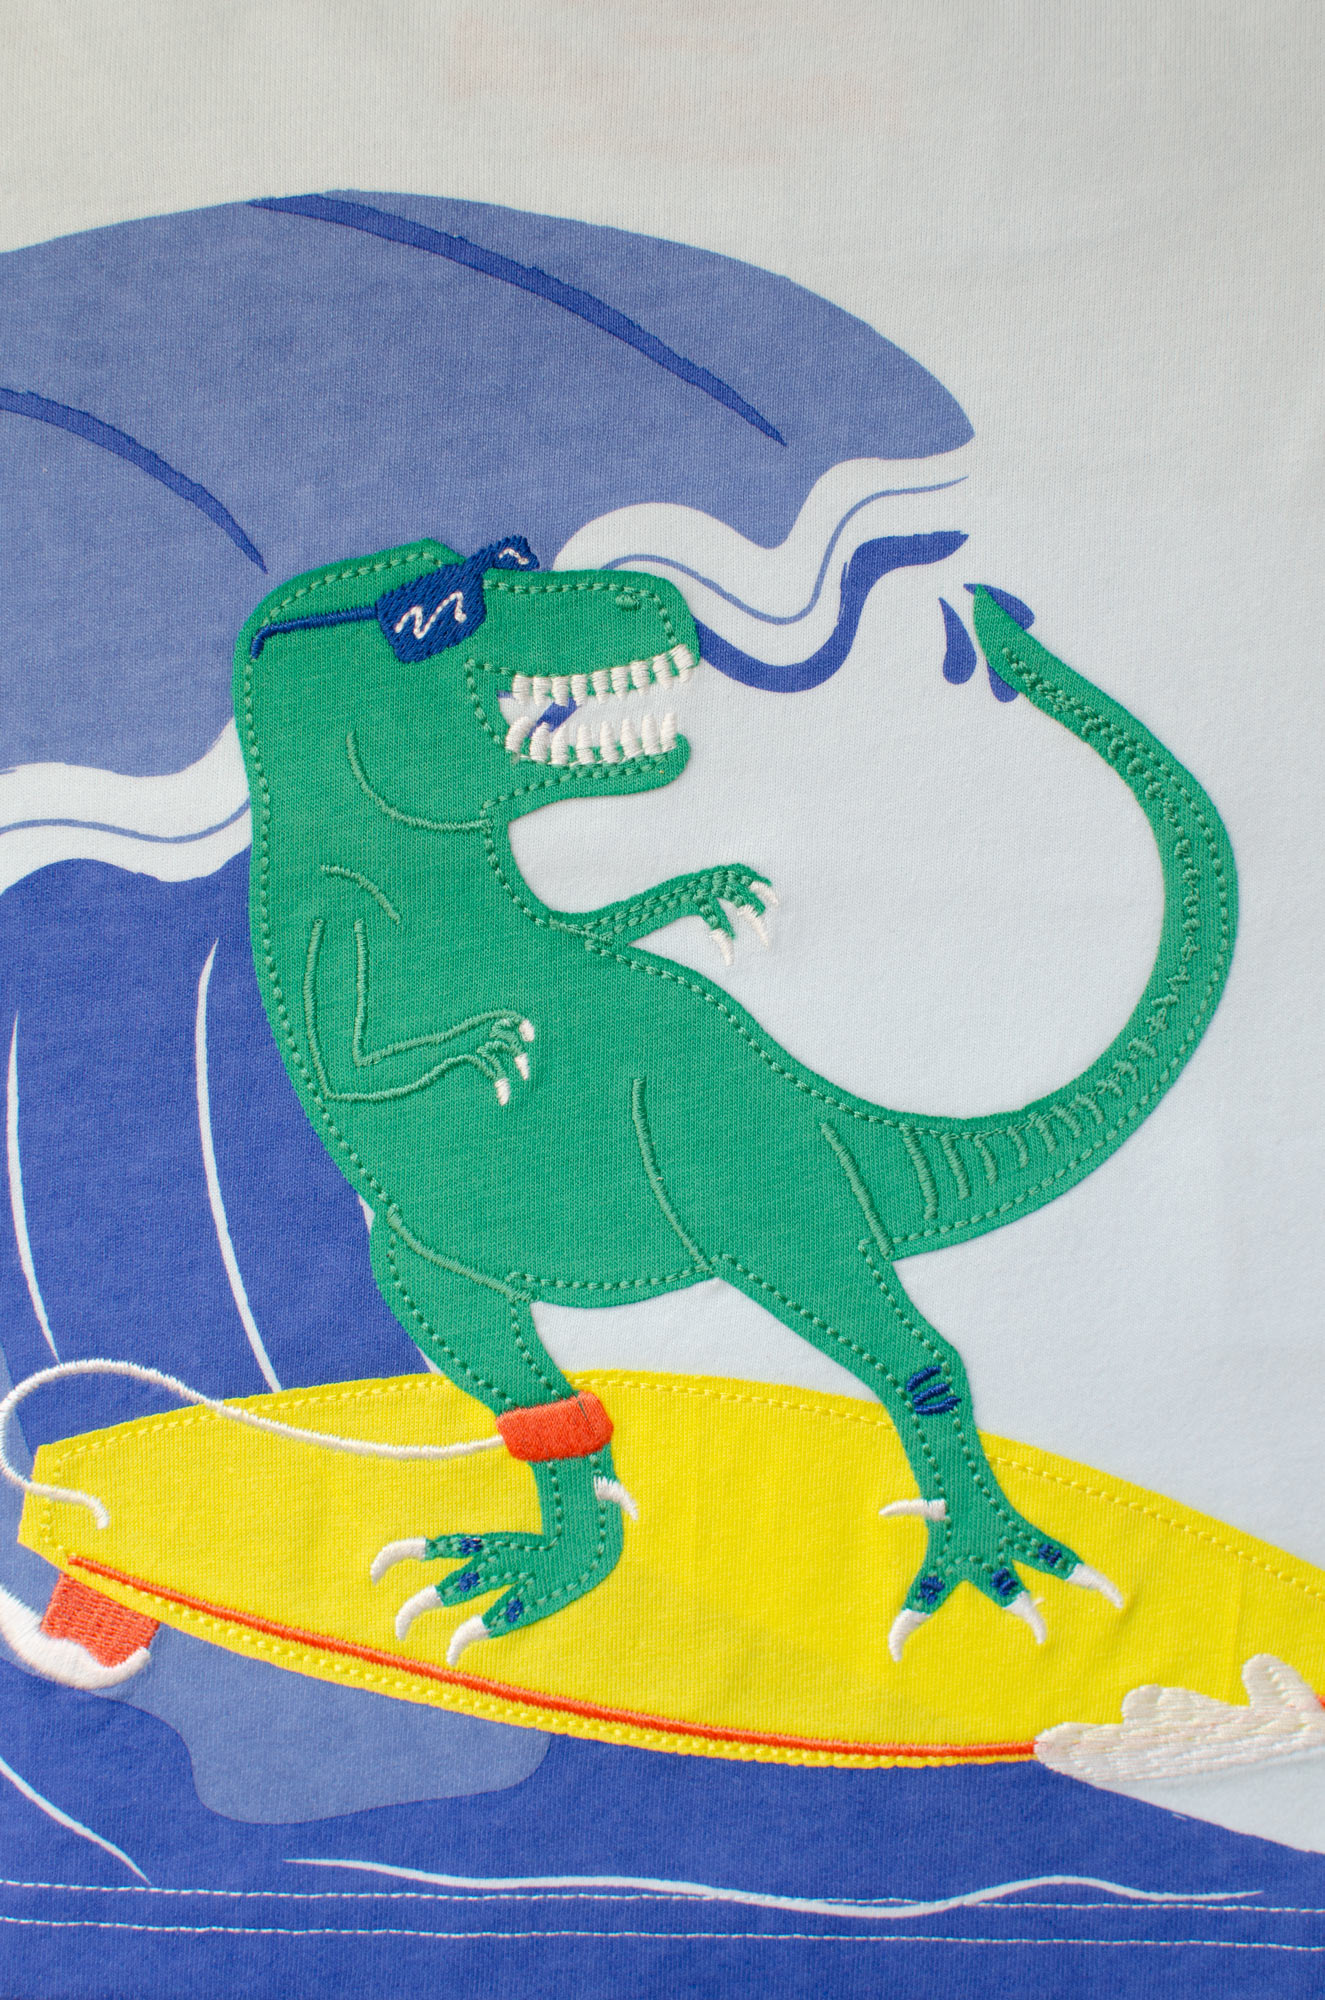 Surfing Dinosaur by Elly Jahnz for Joules